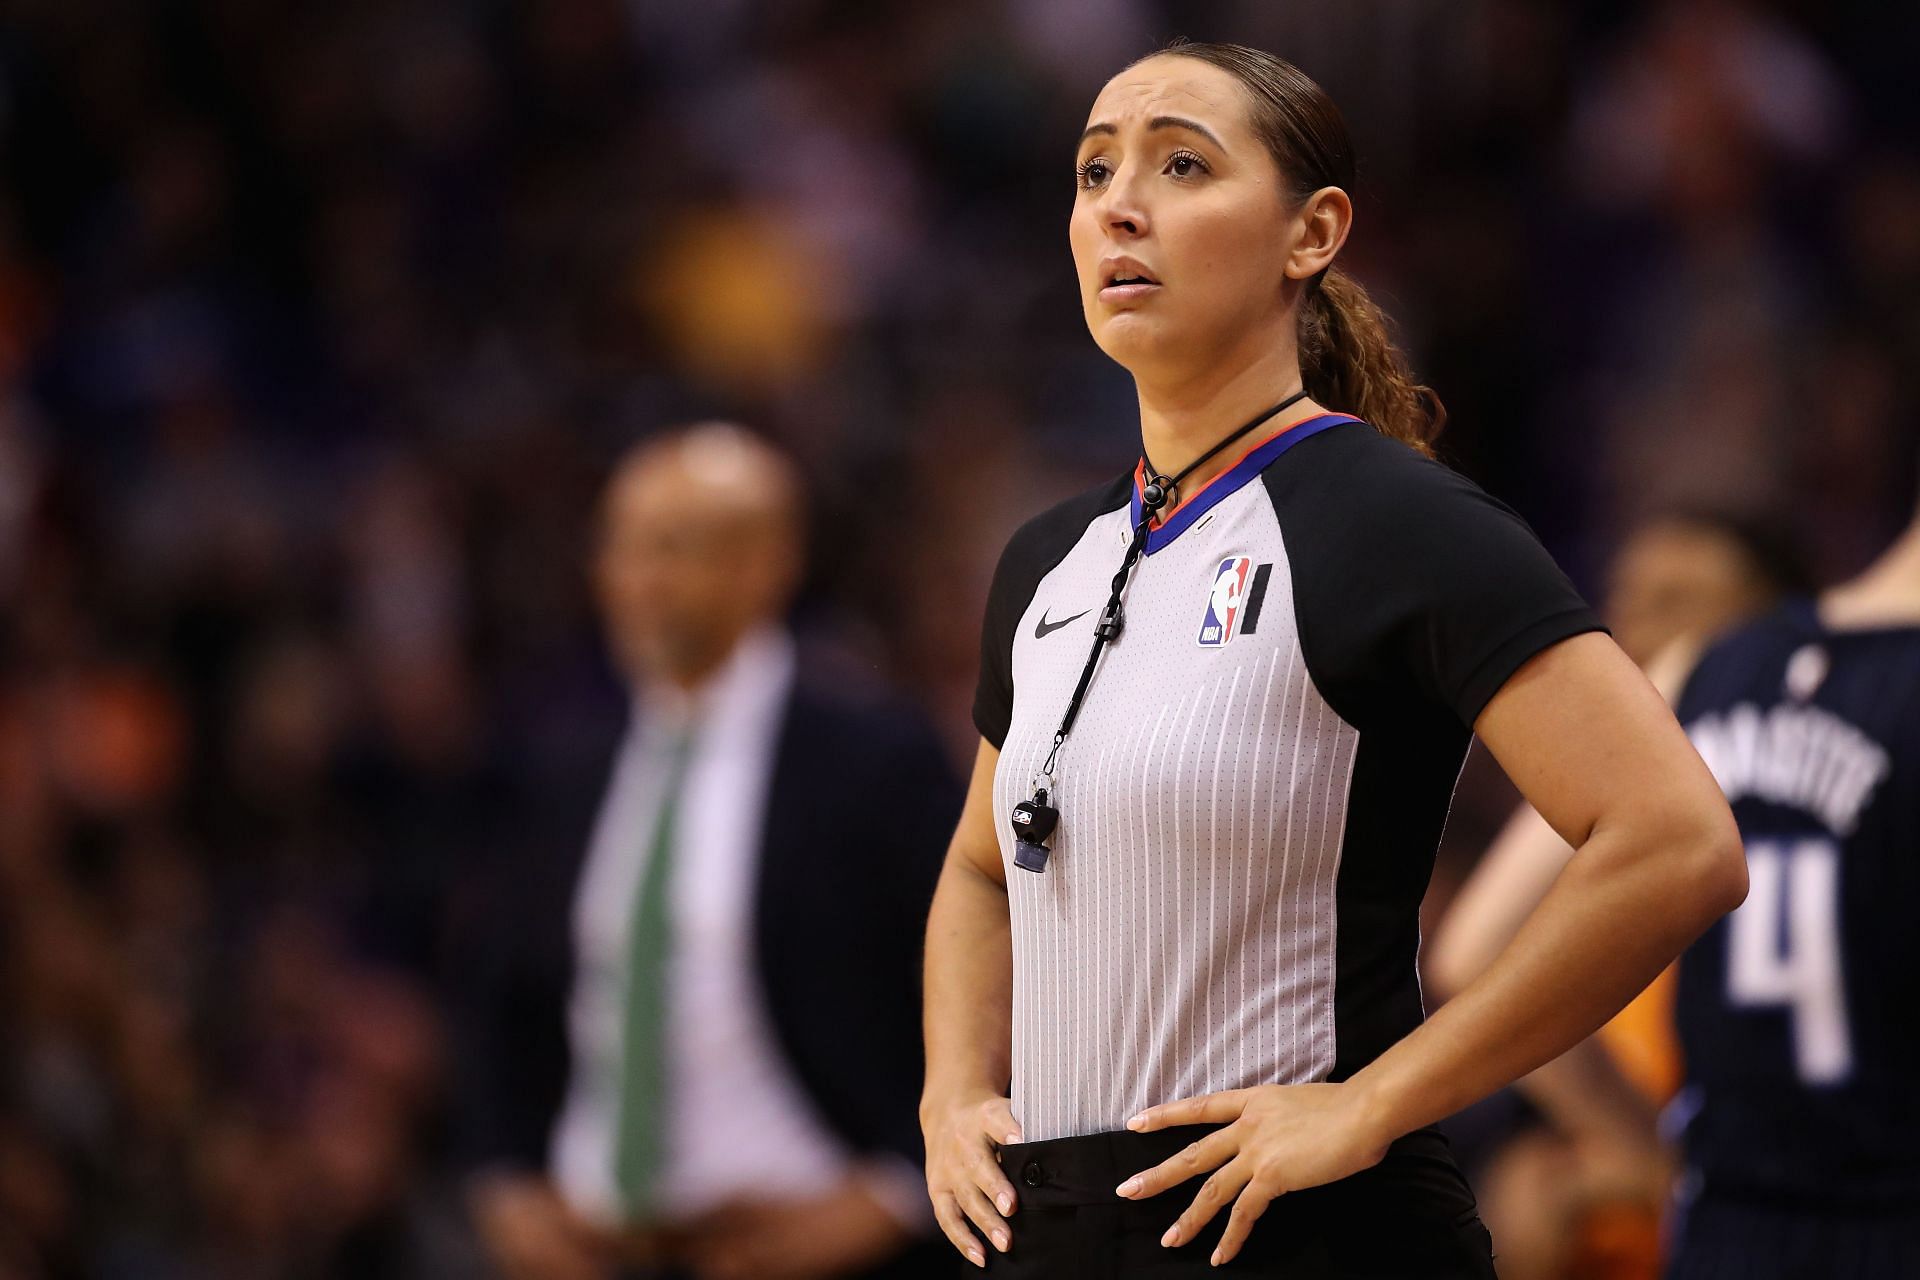 Missouri woman makes history as part of NBA's first two-woman ref